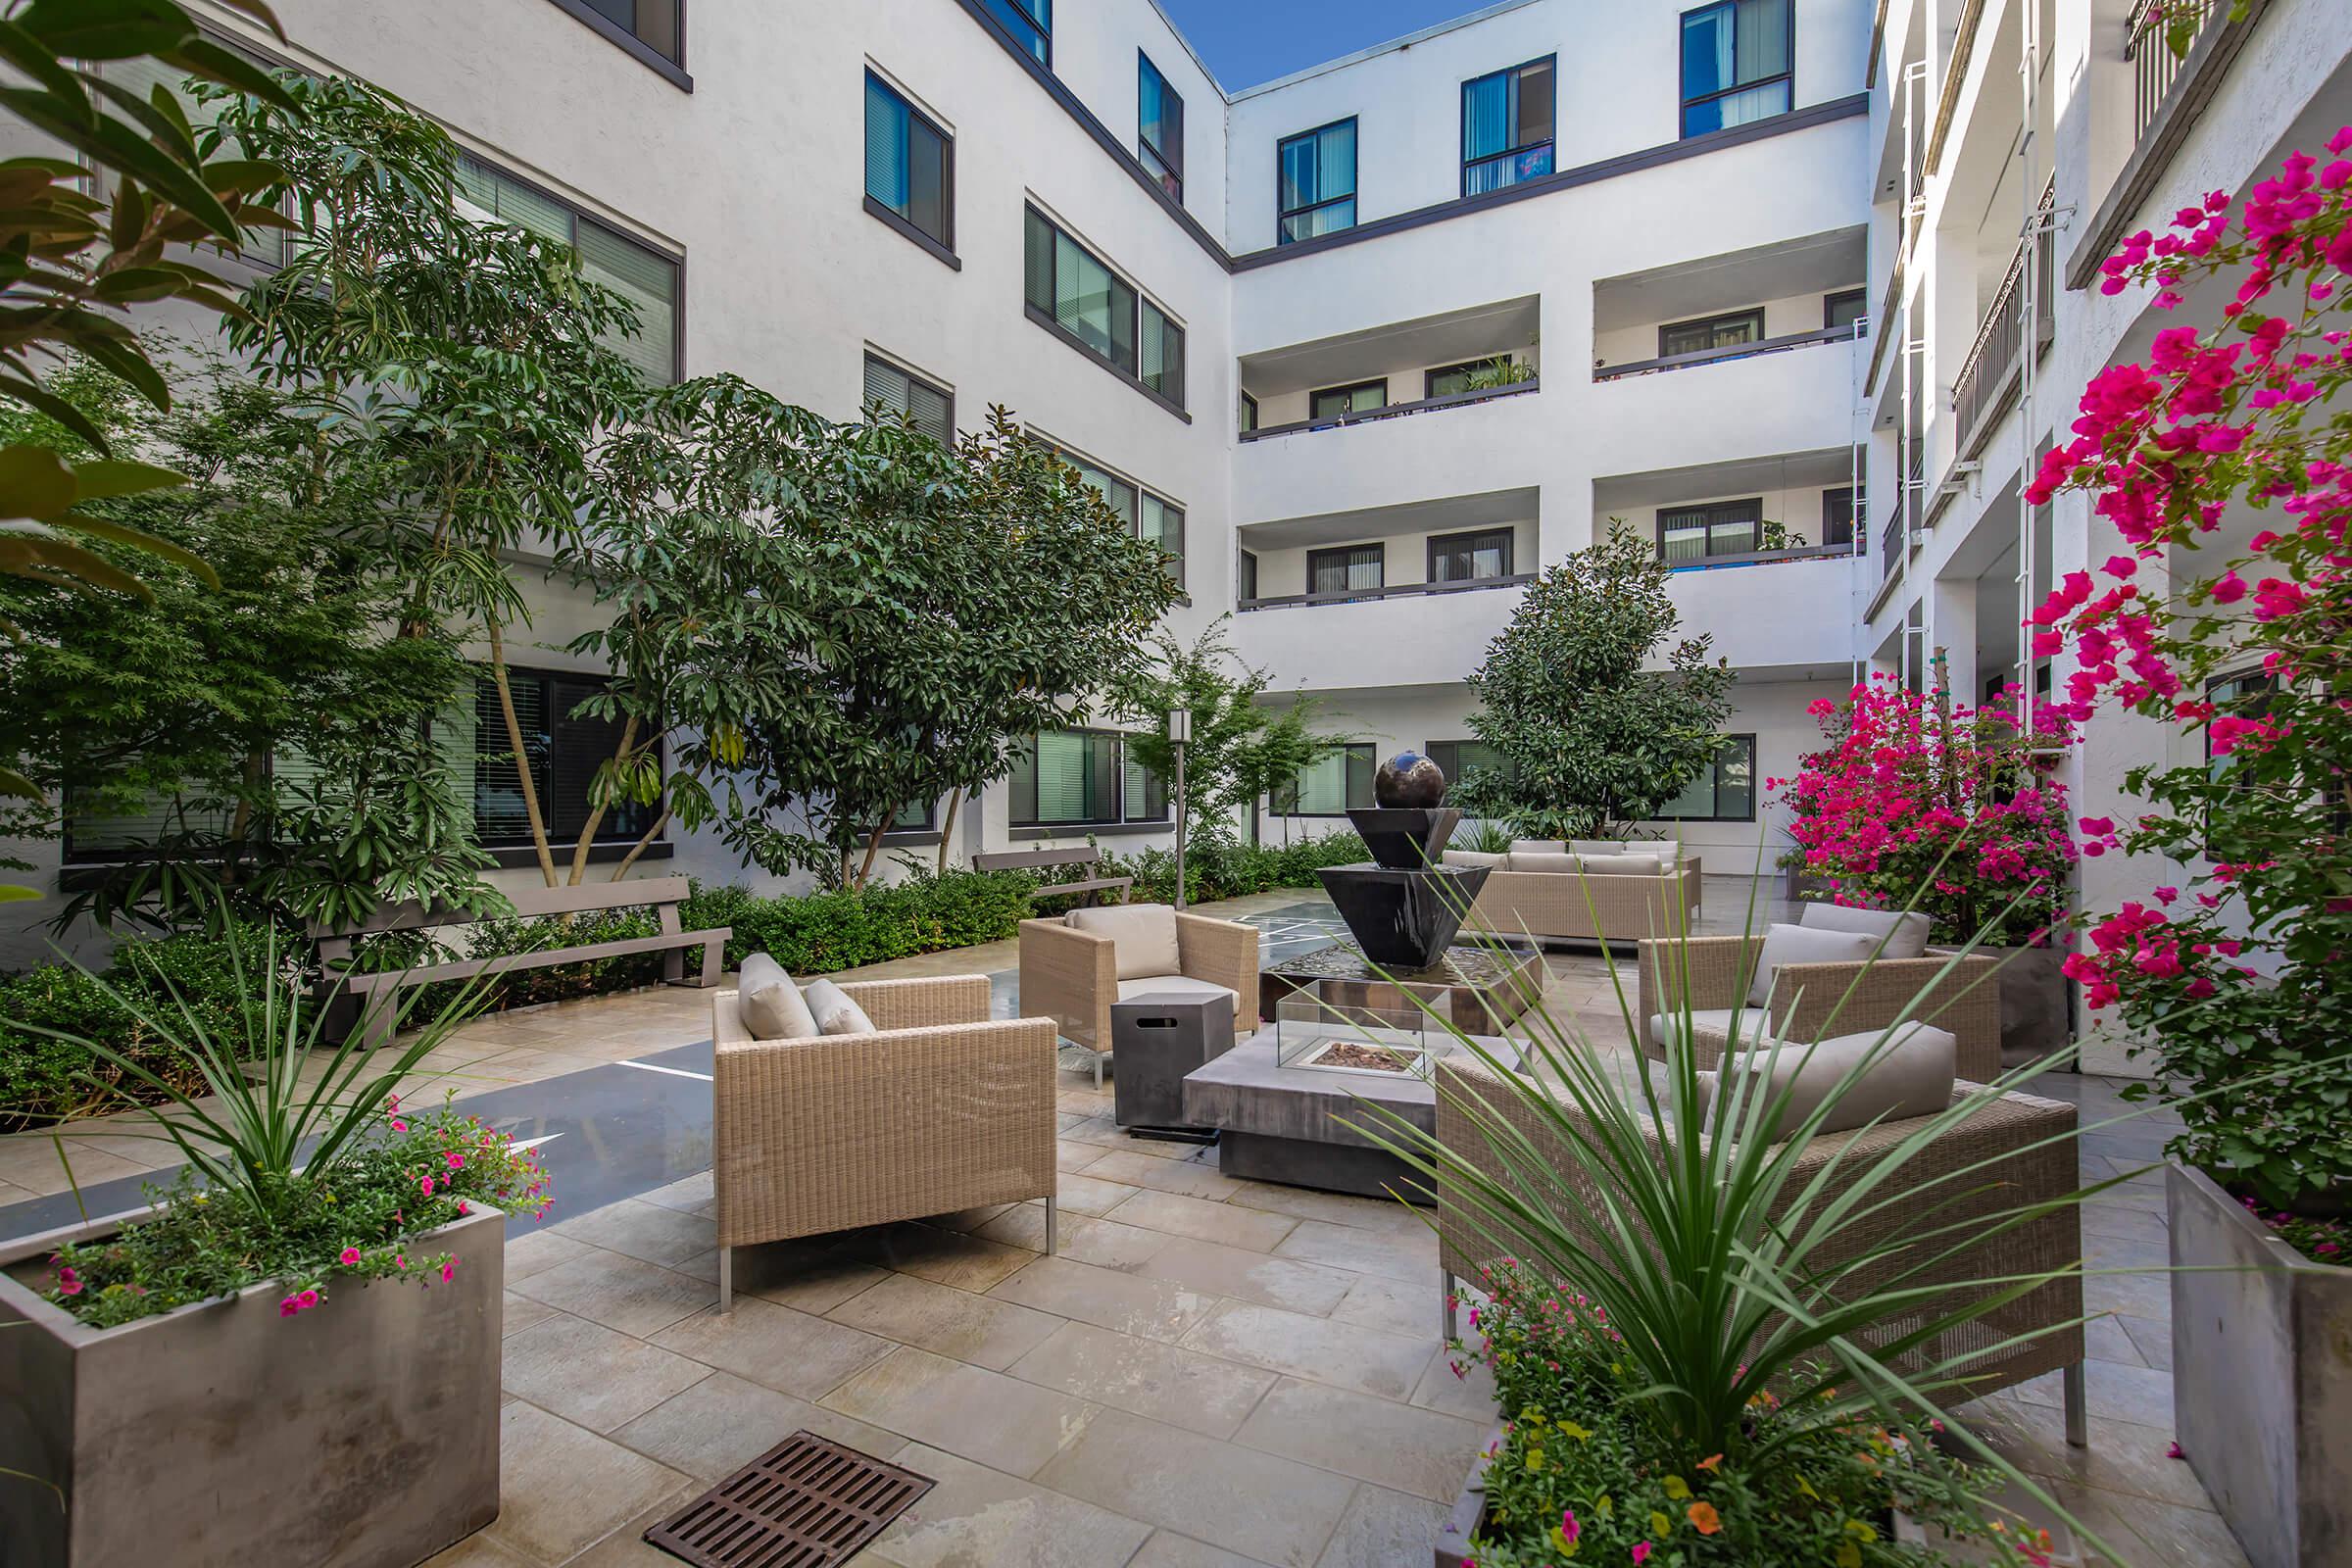 1825 Mission courtyard filled with plants and couches